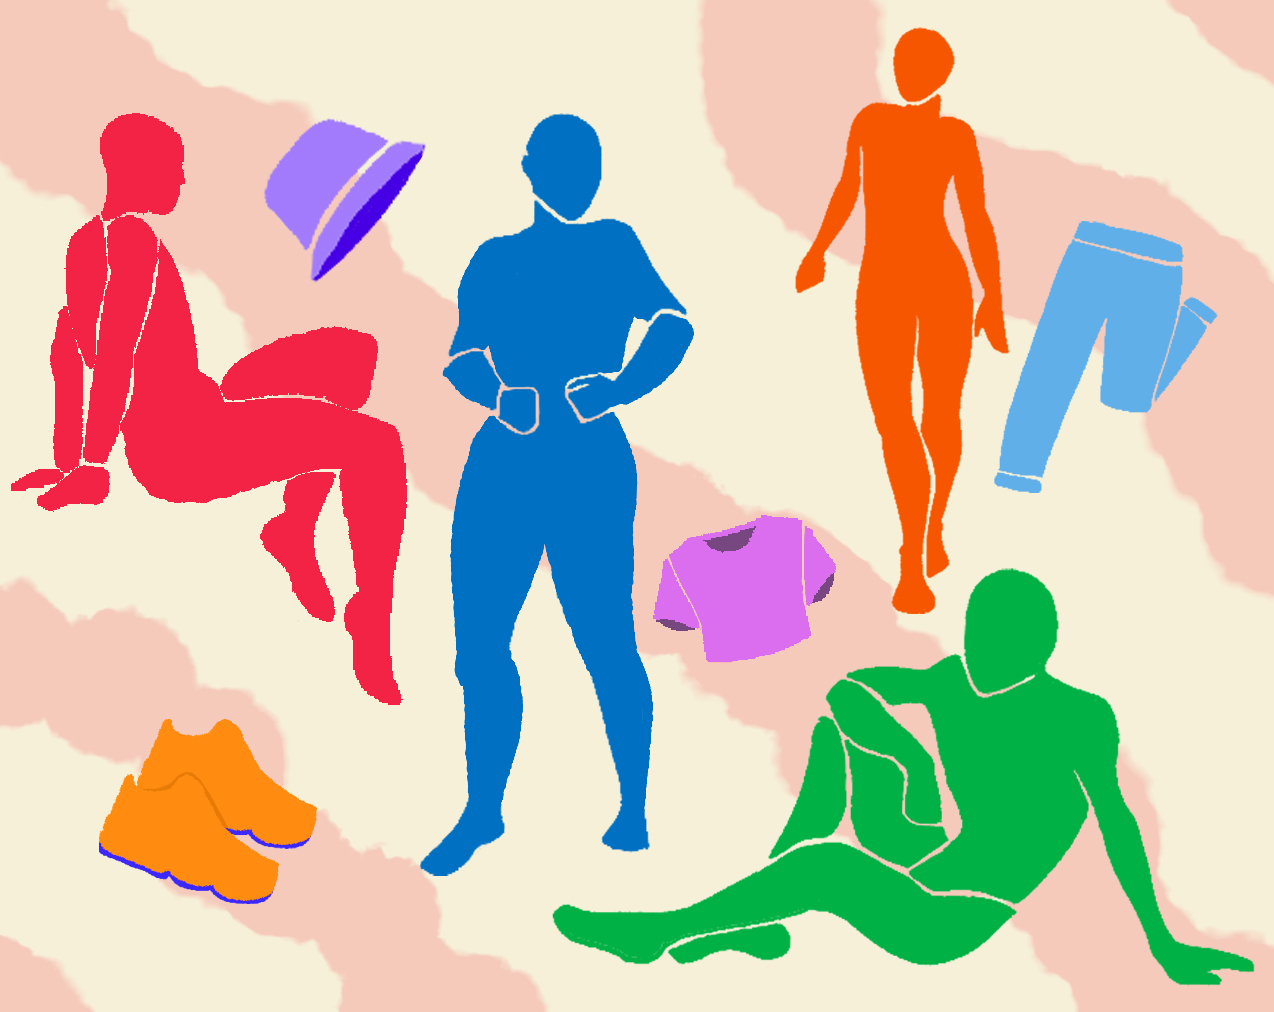 Illustration of colorful androgynous figures and articles of clothing.